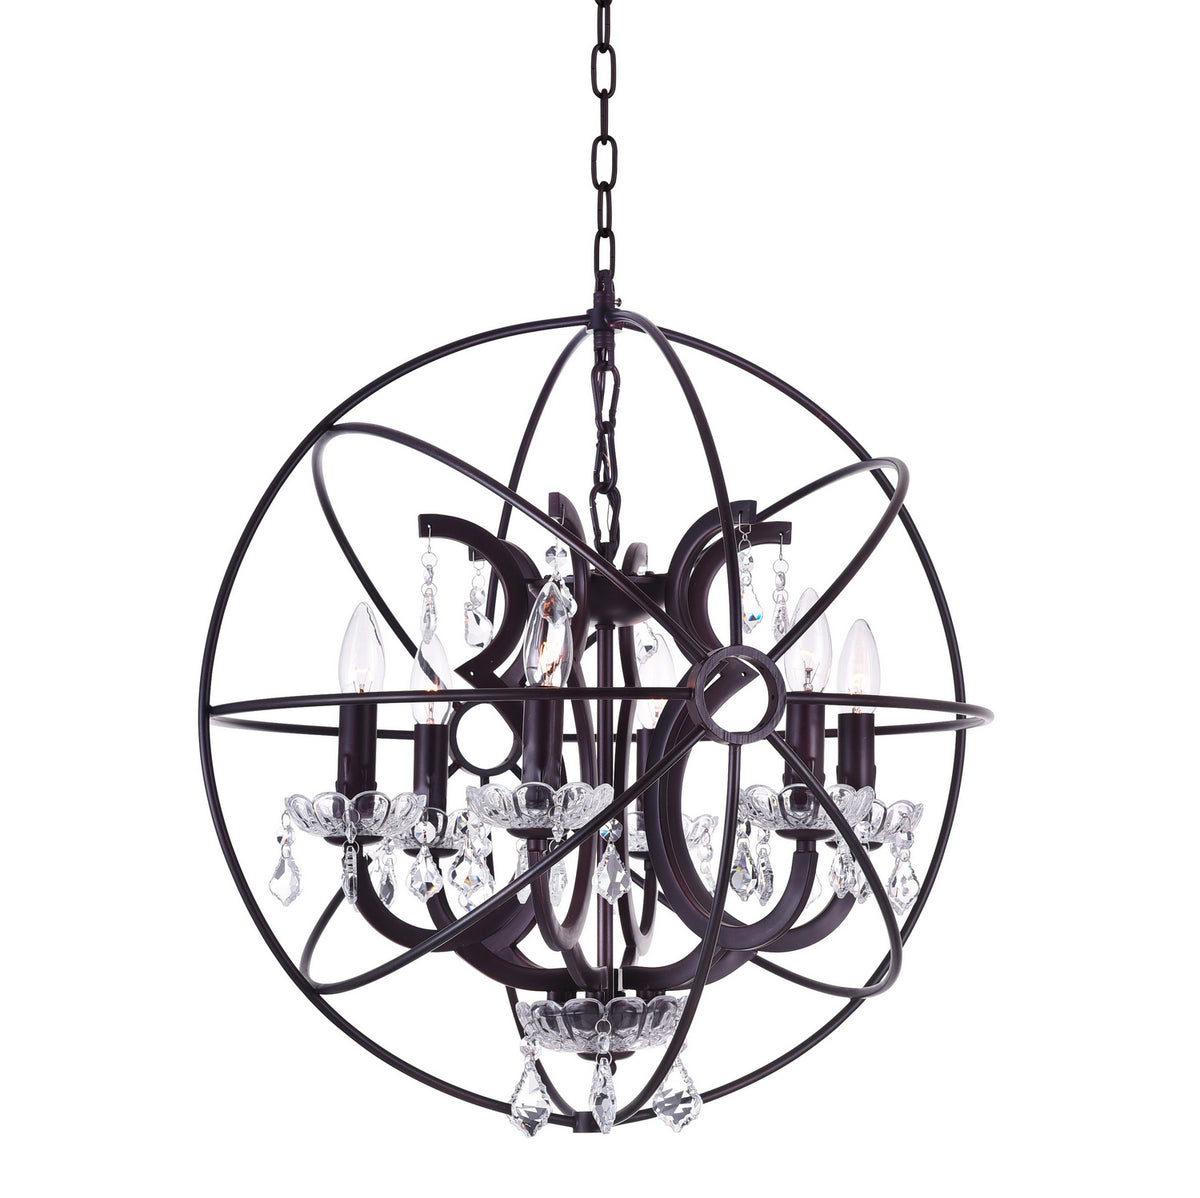 CWI Lighting Six Light Chandelier from the Campechia collection in Brown finish